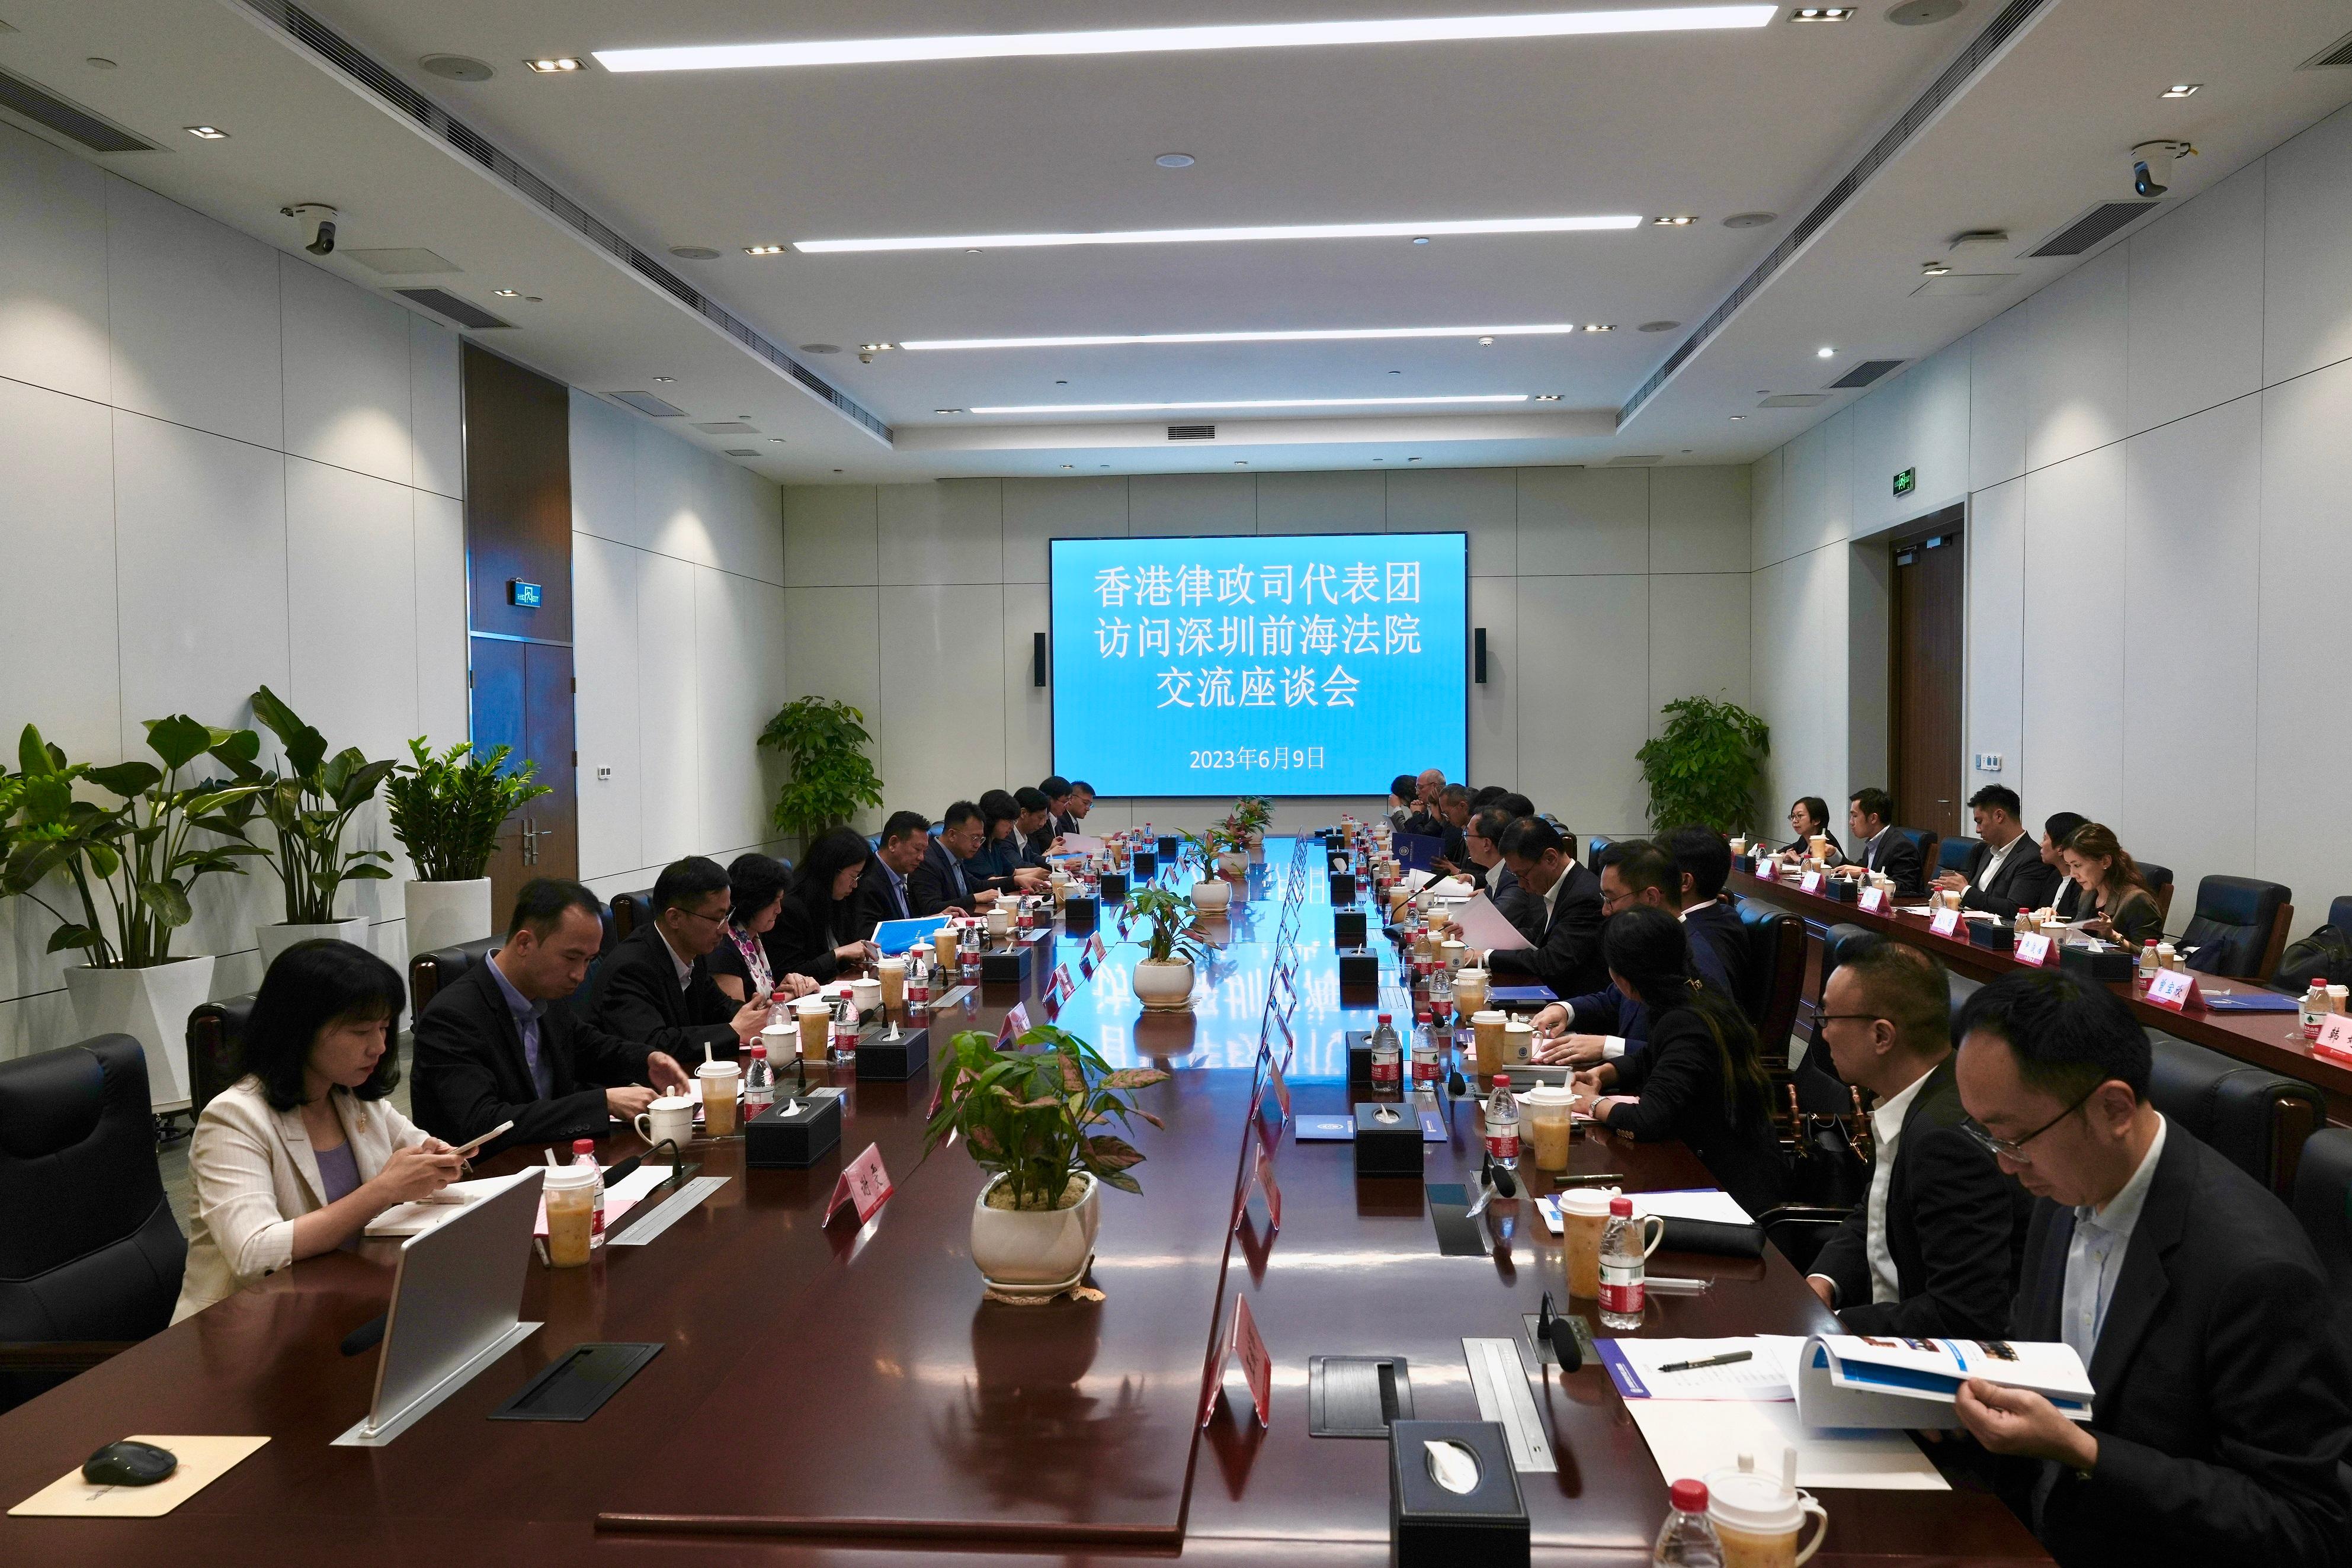 The Secretary for Justice, Mr Paul Lam, SC (seventh right), and the delegation comprising representatives from the Hong Kong legal sector call on the Shenzhen Qianhai Cooperation Zone People's Court (Qianhai Court) and met with the President of the Qianhai Court, Mr Bian Fei (seventh left), on the afternoon of June 9 in Shenzhen. Photo shows both sides in the meeting.

